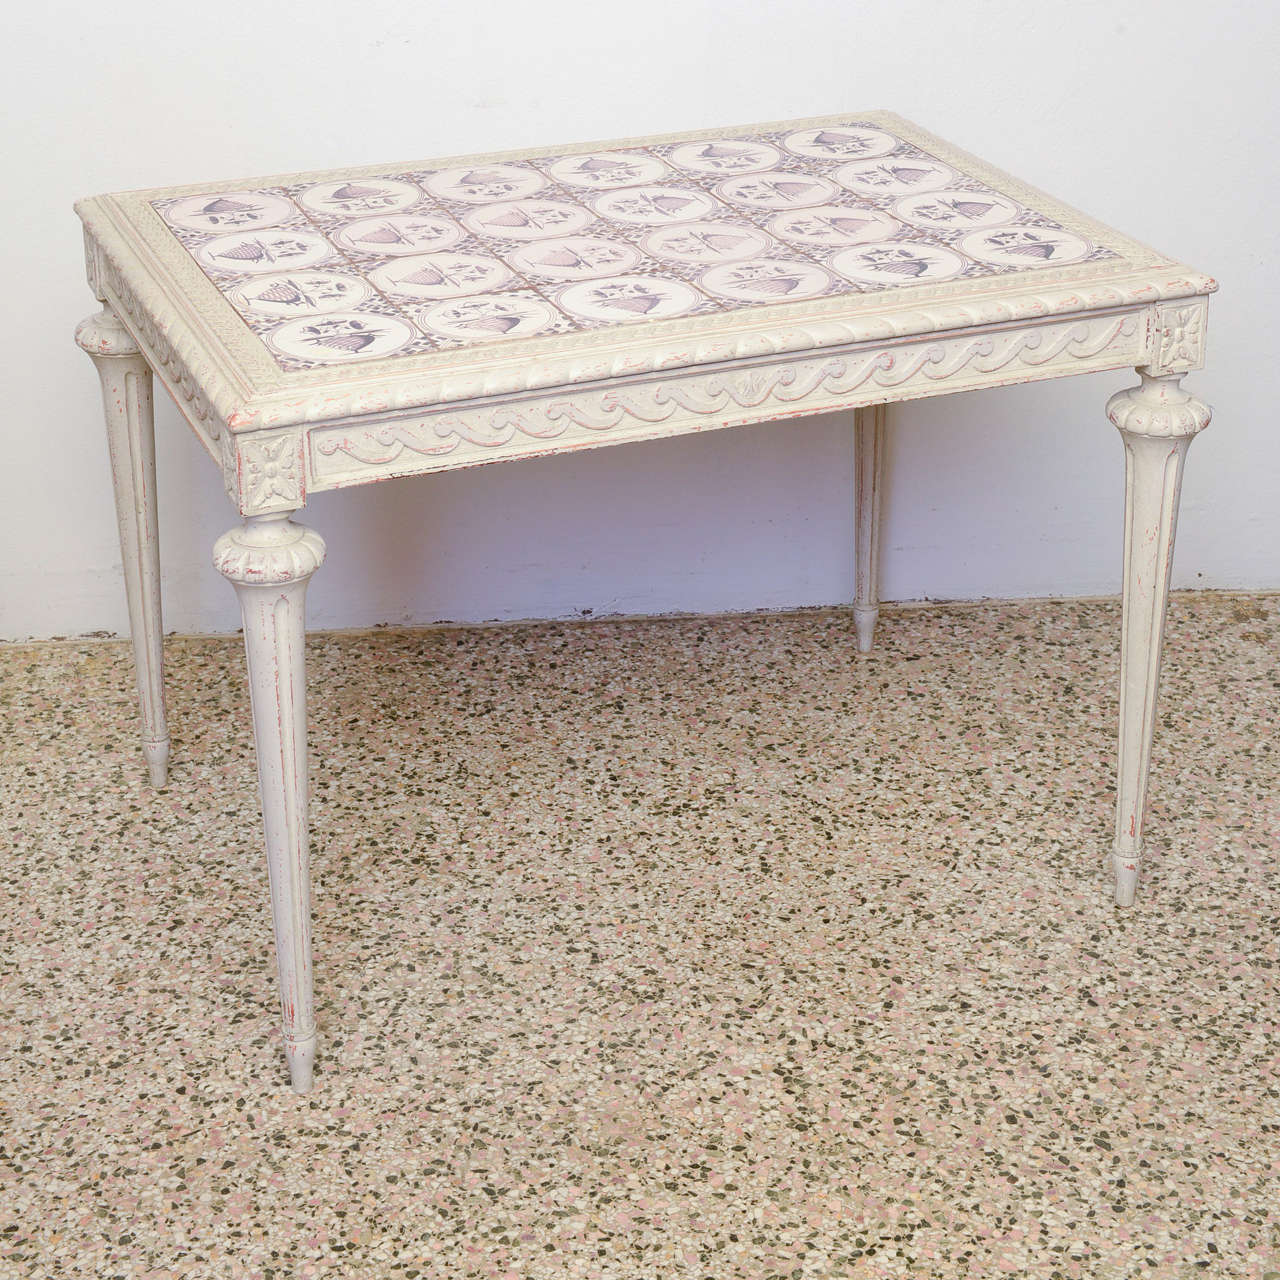 Gustavian 19th Century Swedish Antique Table with Ceramic Tile Top For Sale